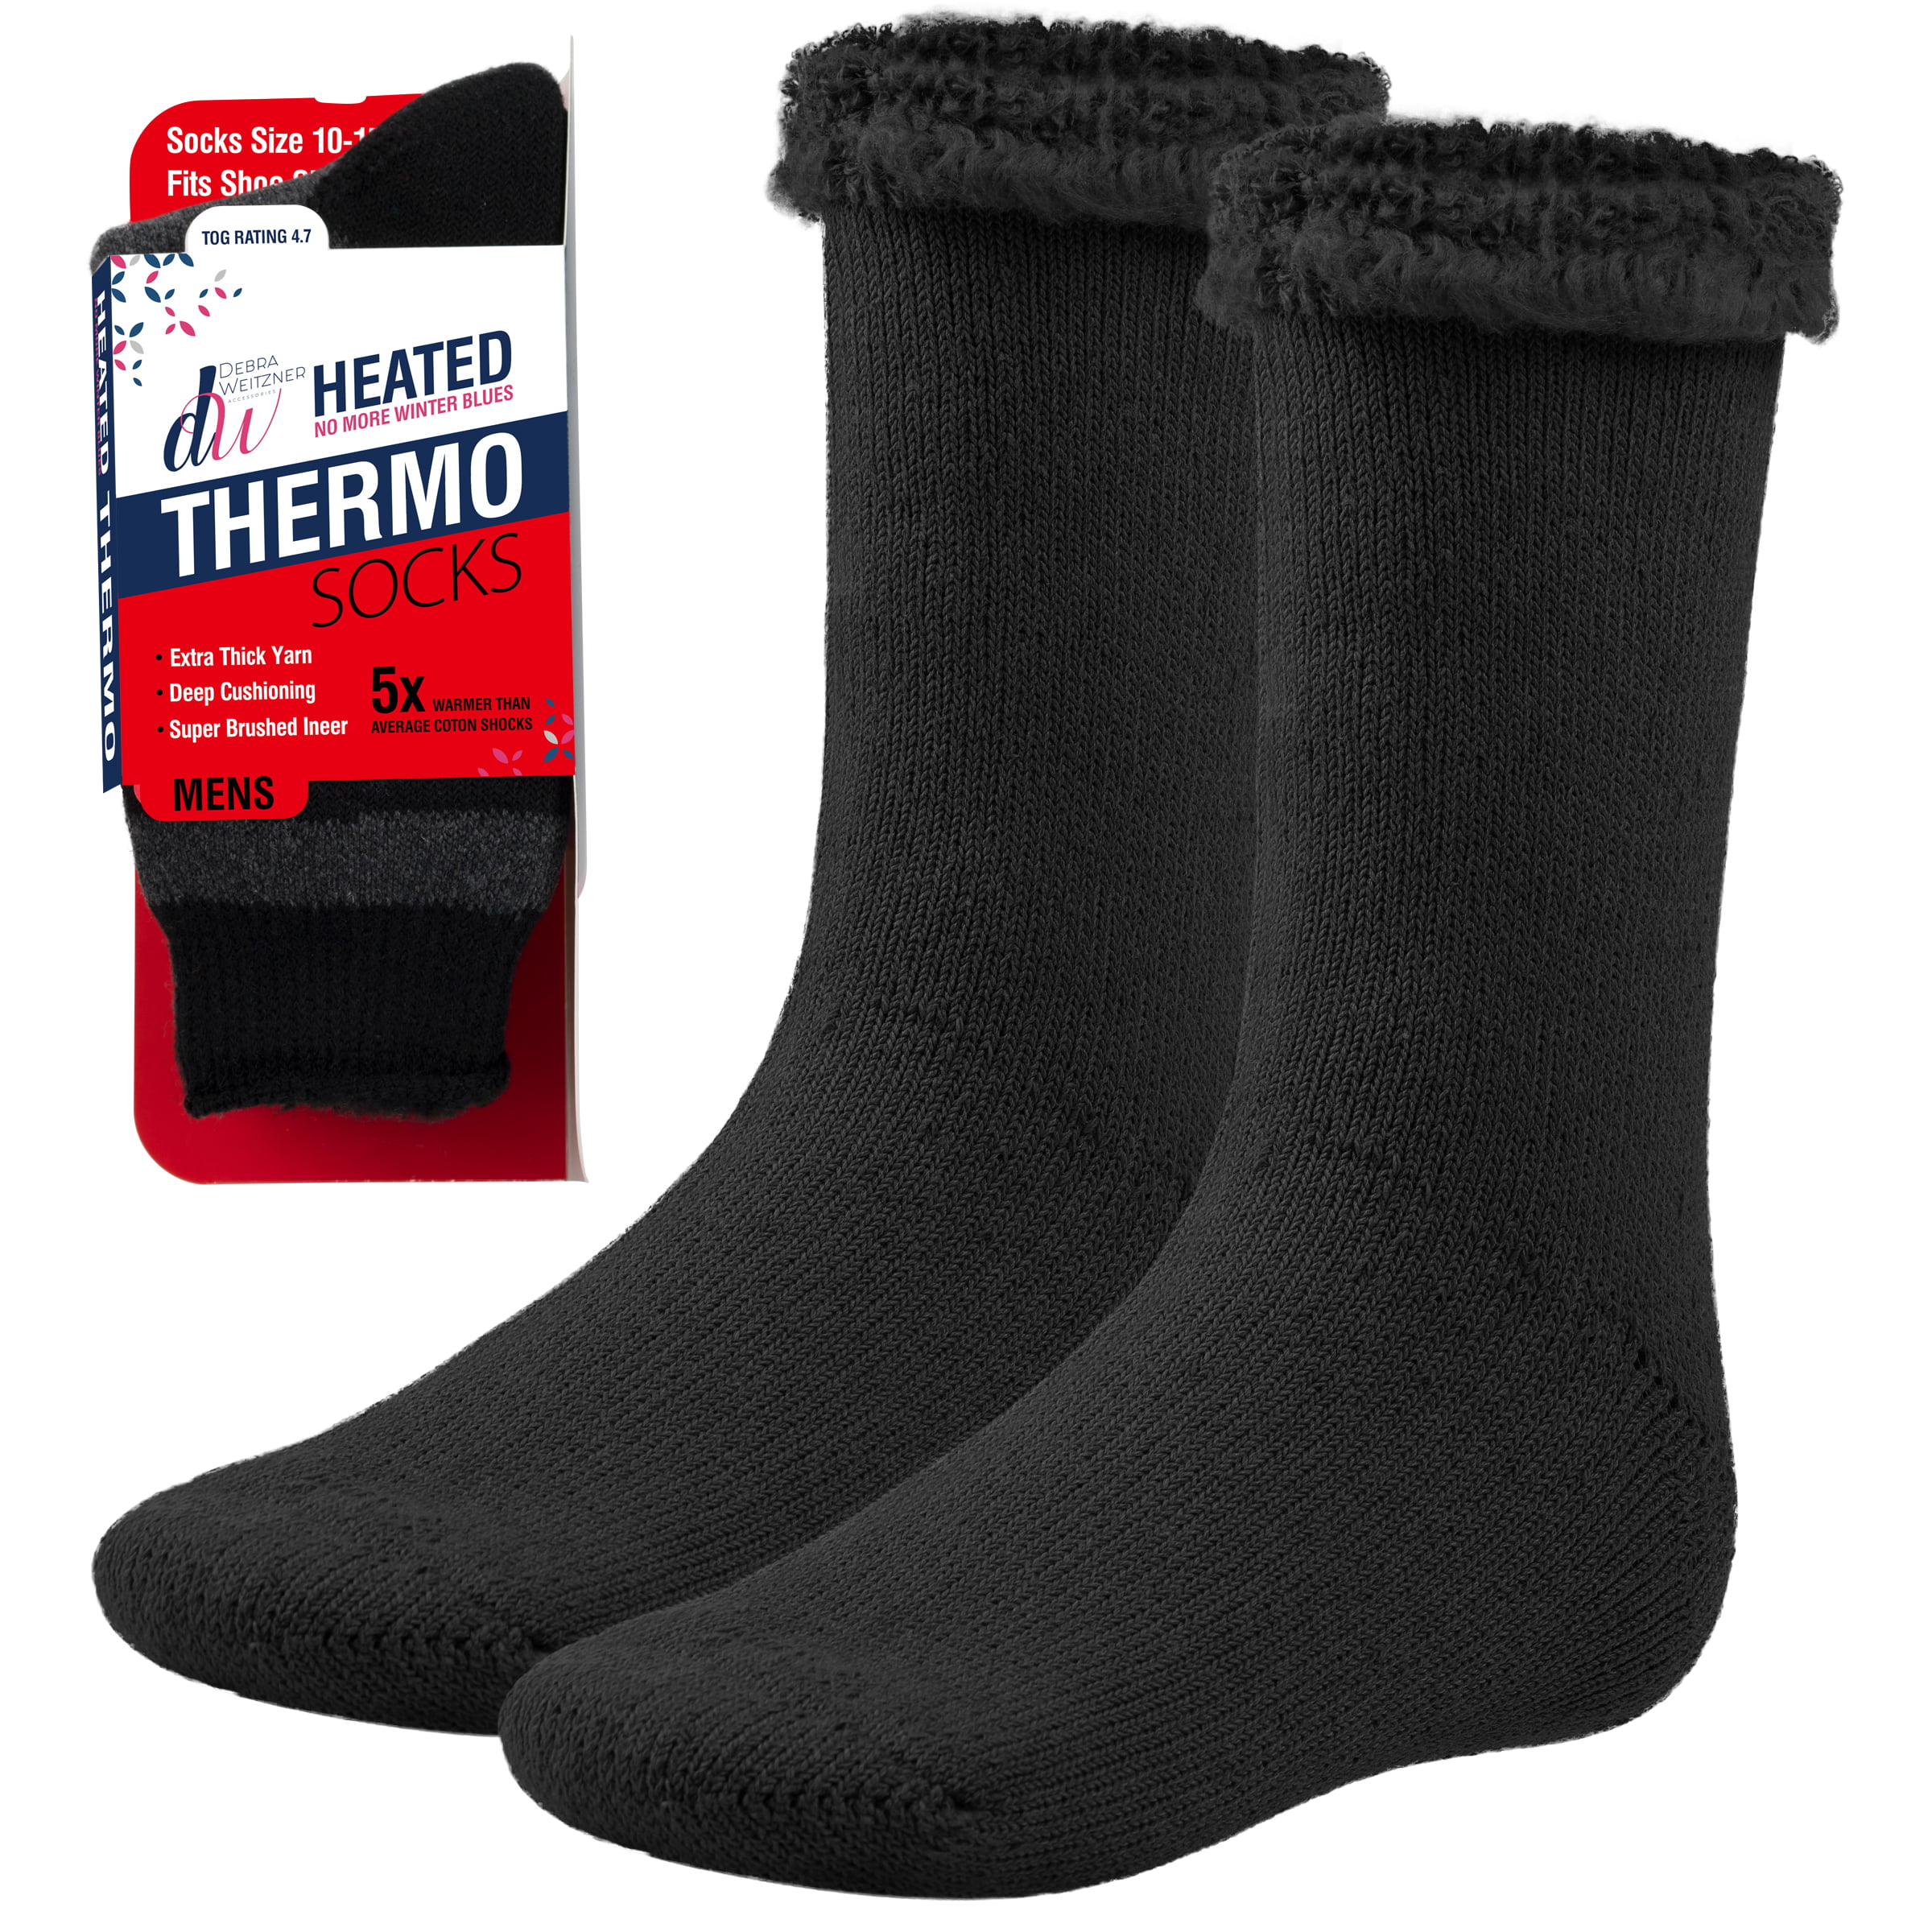 Women Men Thick Boot Thermal Socks Warm Winter Long Sock For Cold Weather 